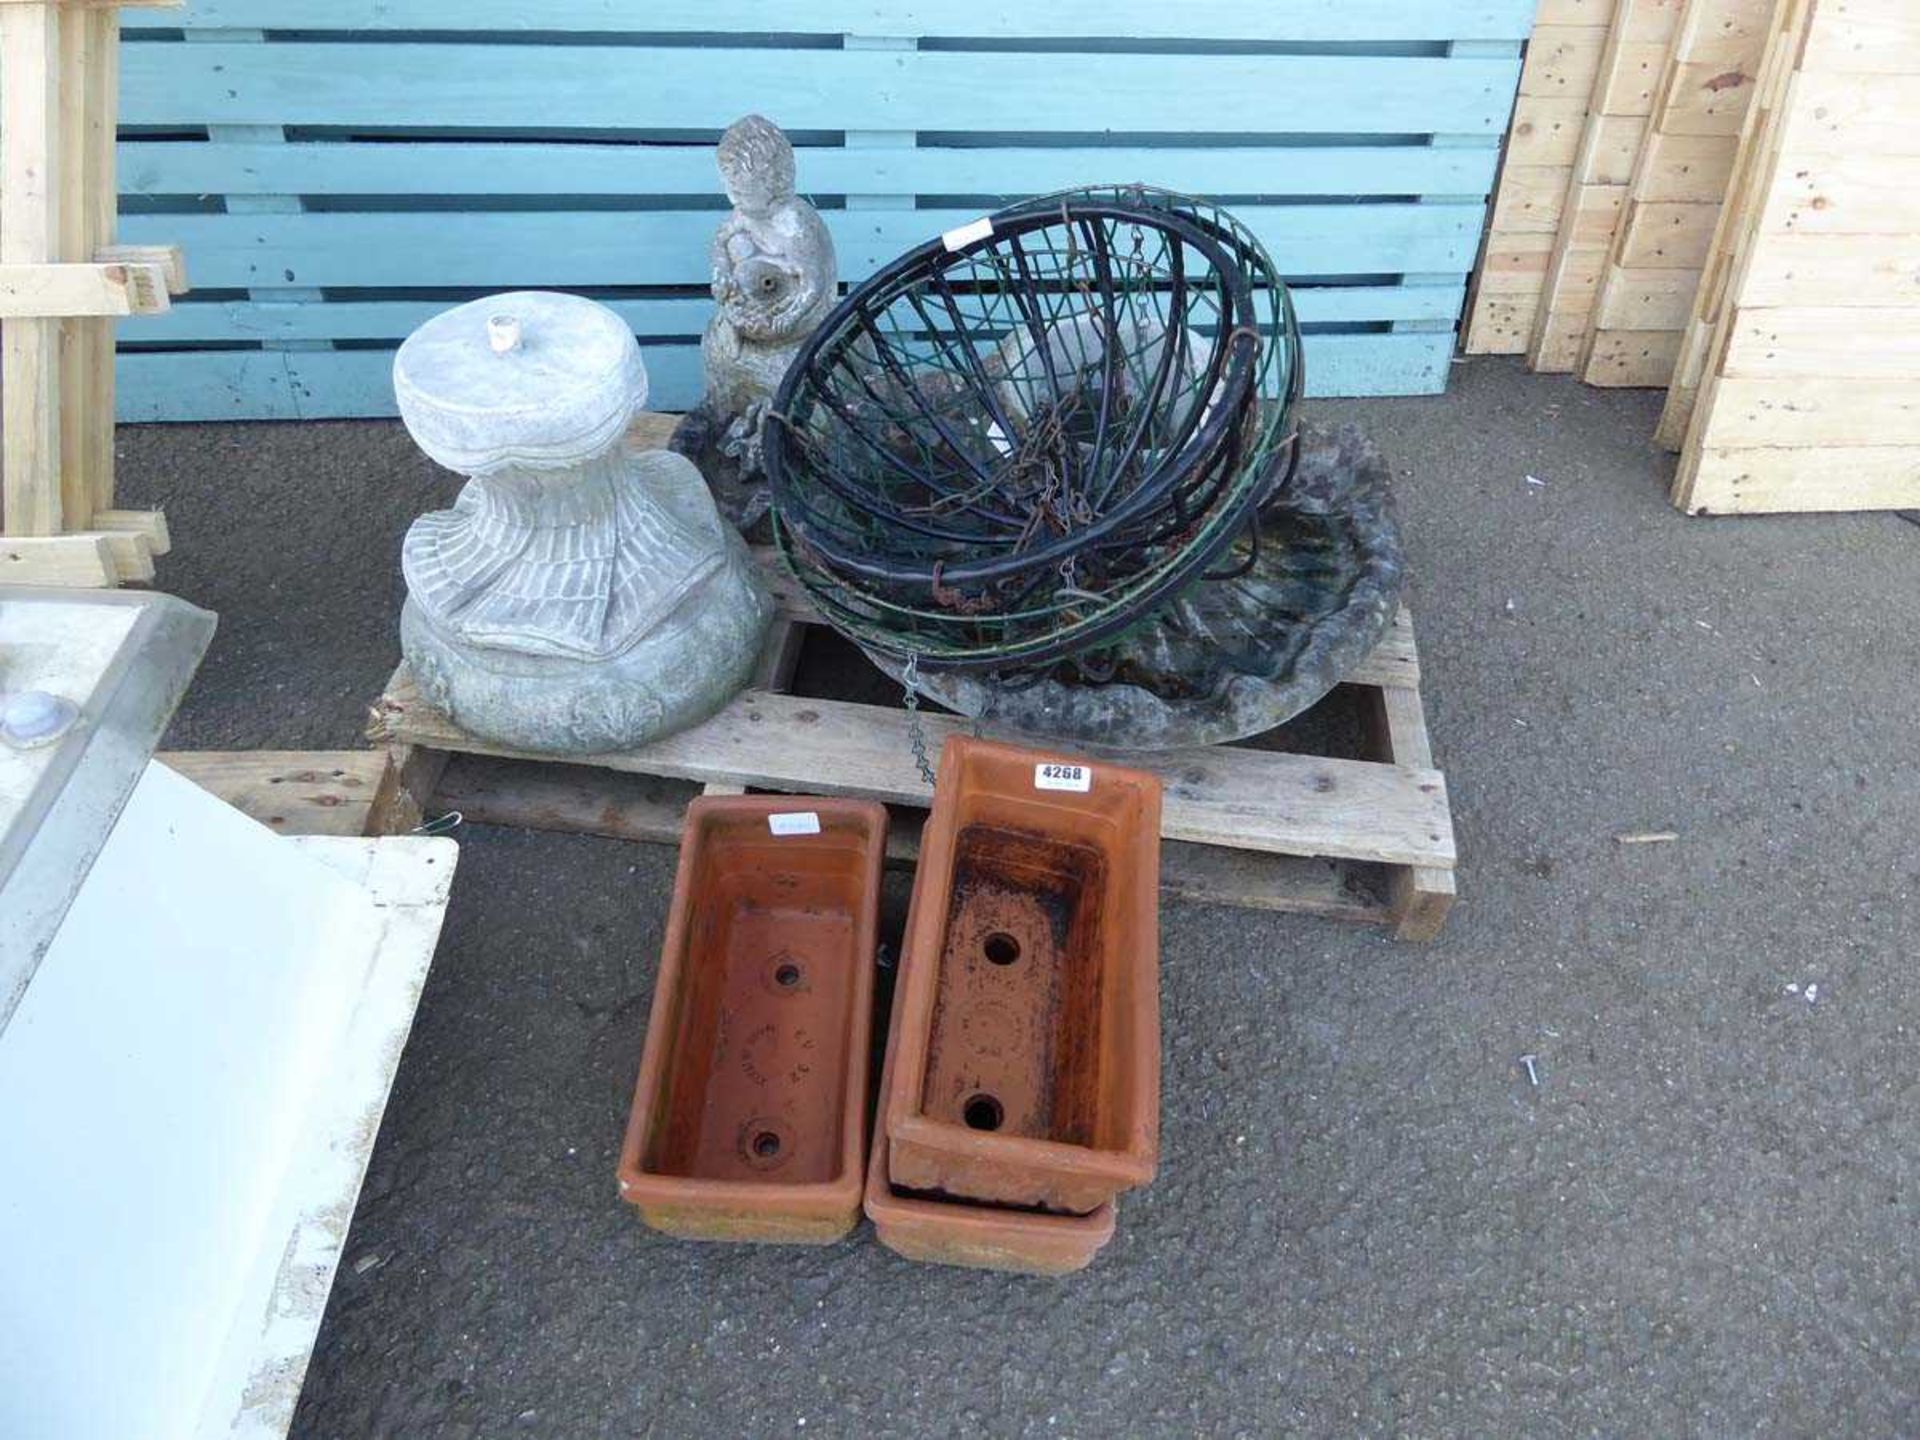 Small pallet containing hanging baskets, bird bath and 3 terracotta pots